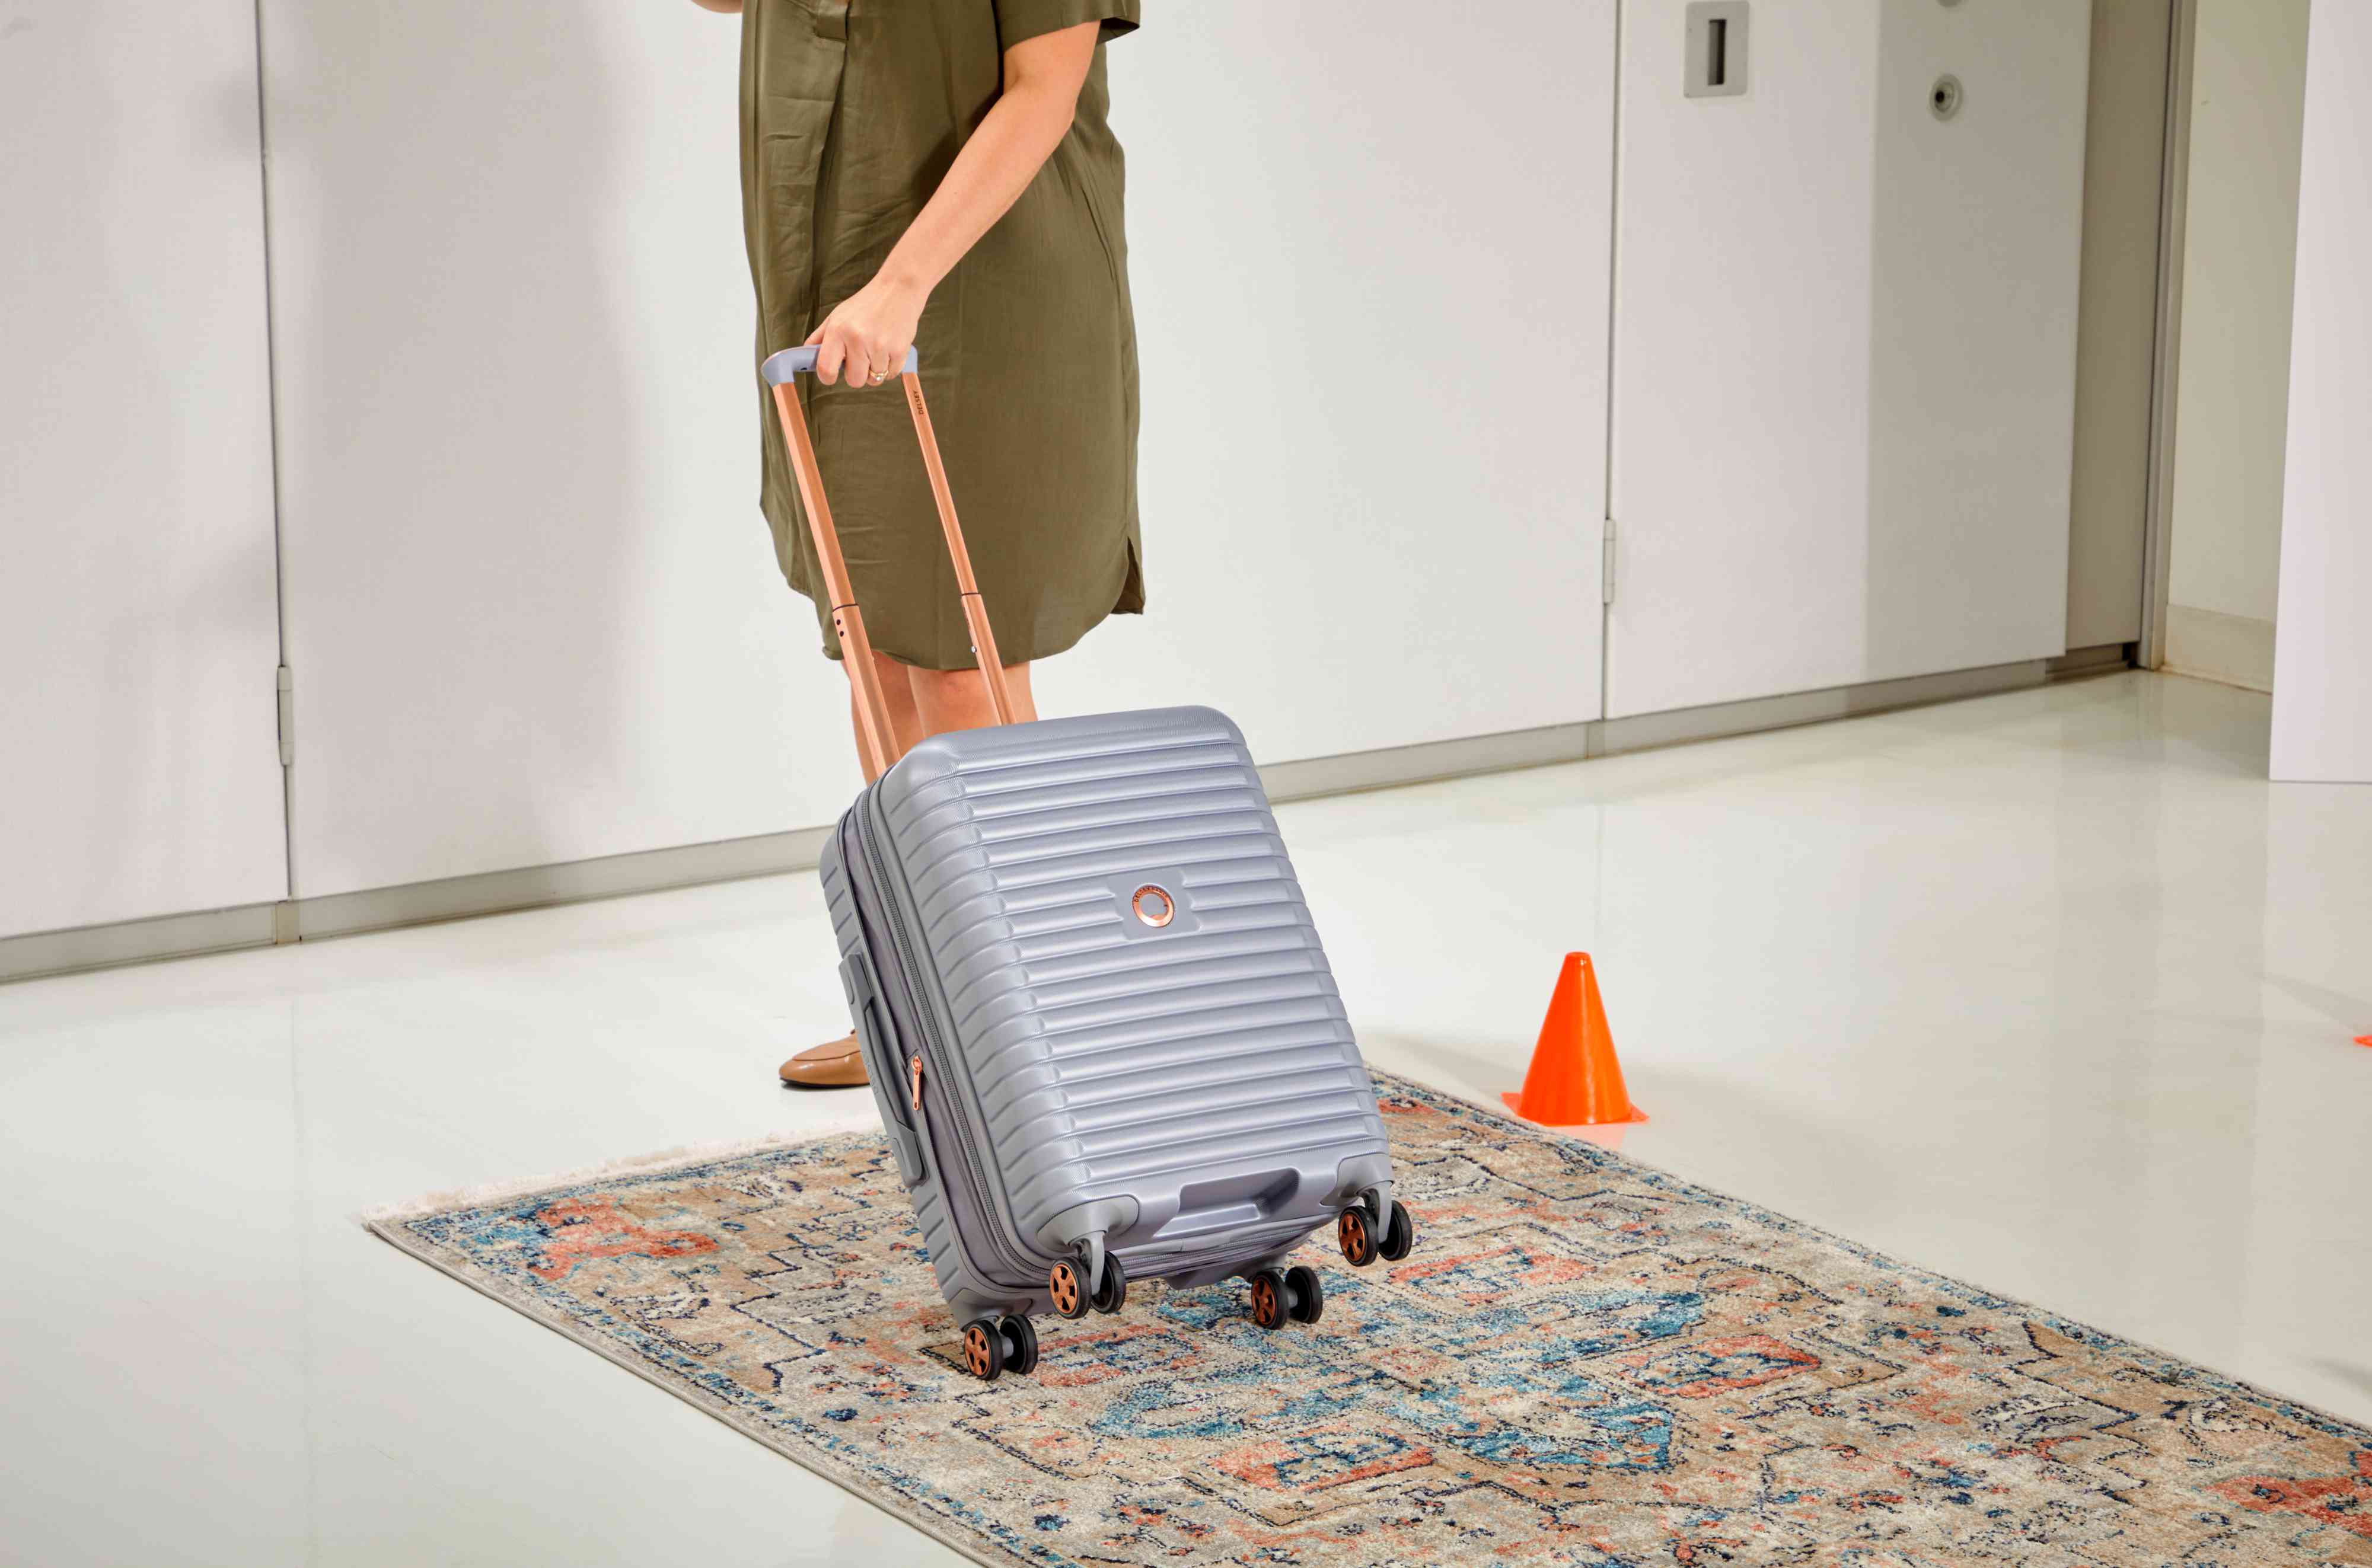 Delsey Cruise 3.0 Carry-on - 21" being rolled on a rug by a person